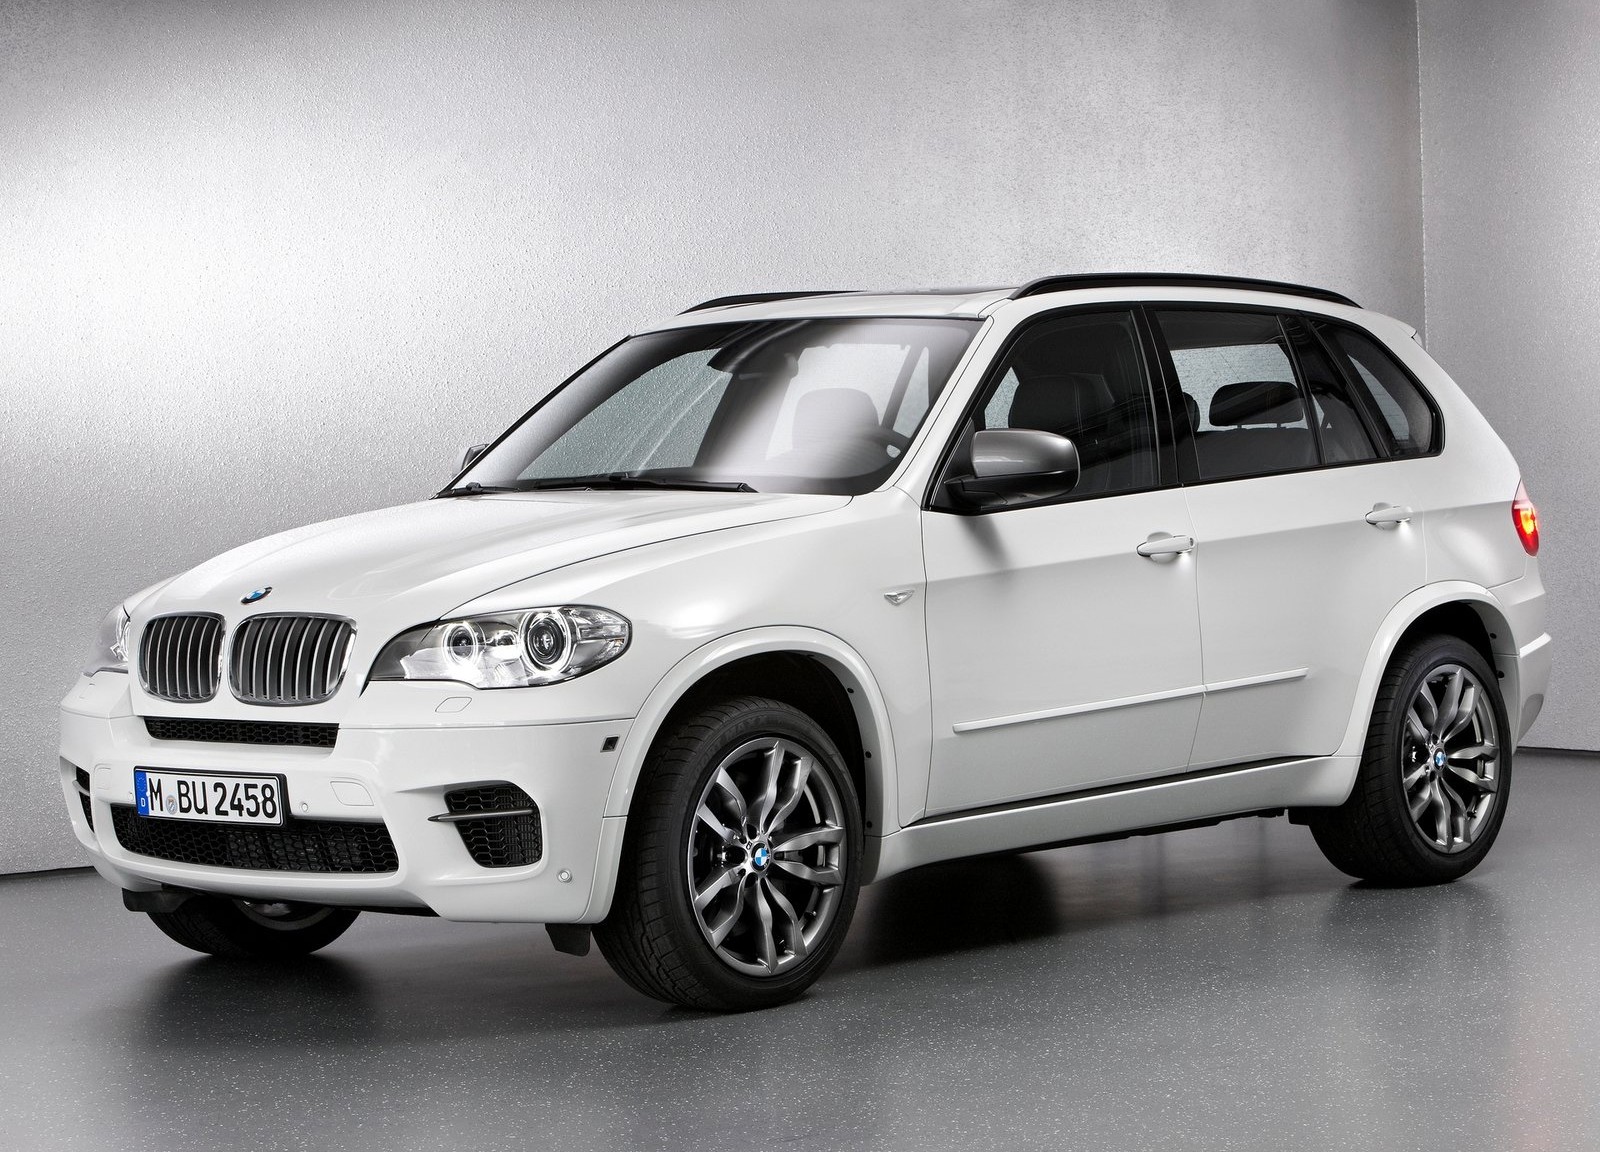 2013-BMW-X5-M50d-front-angle.jpg